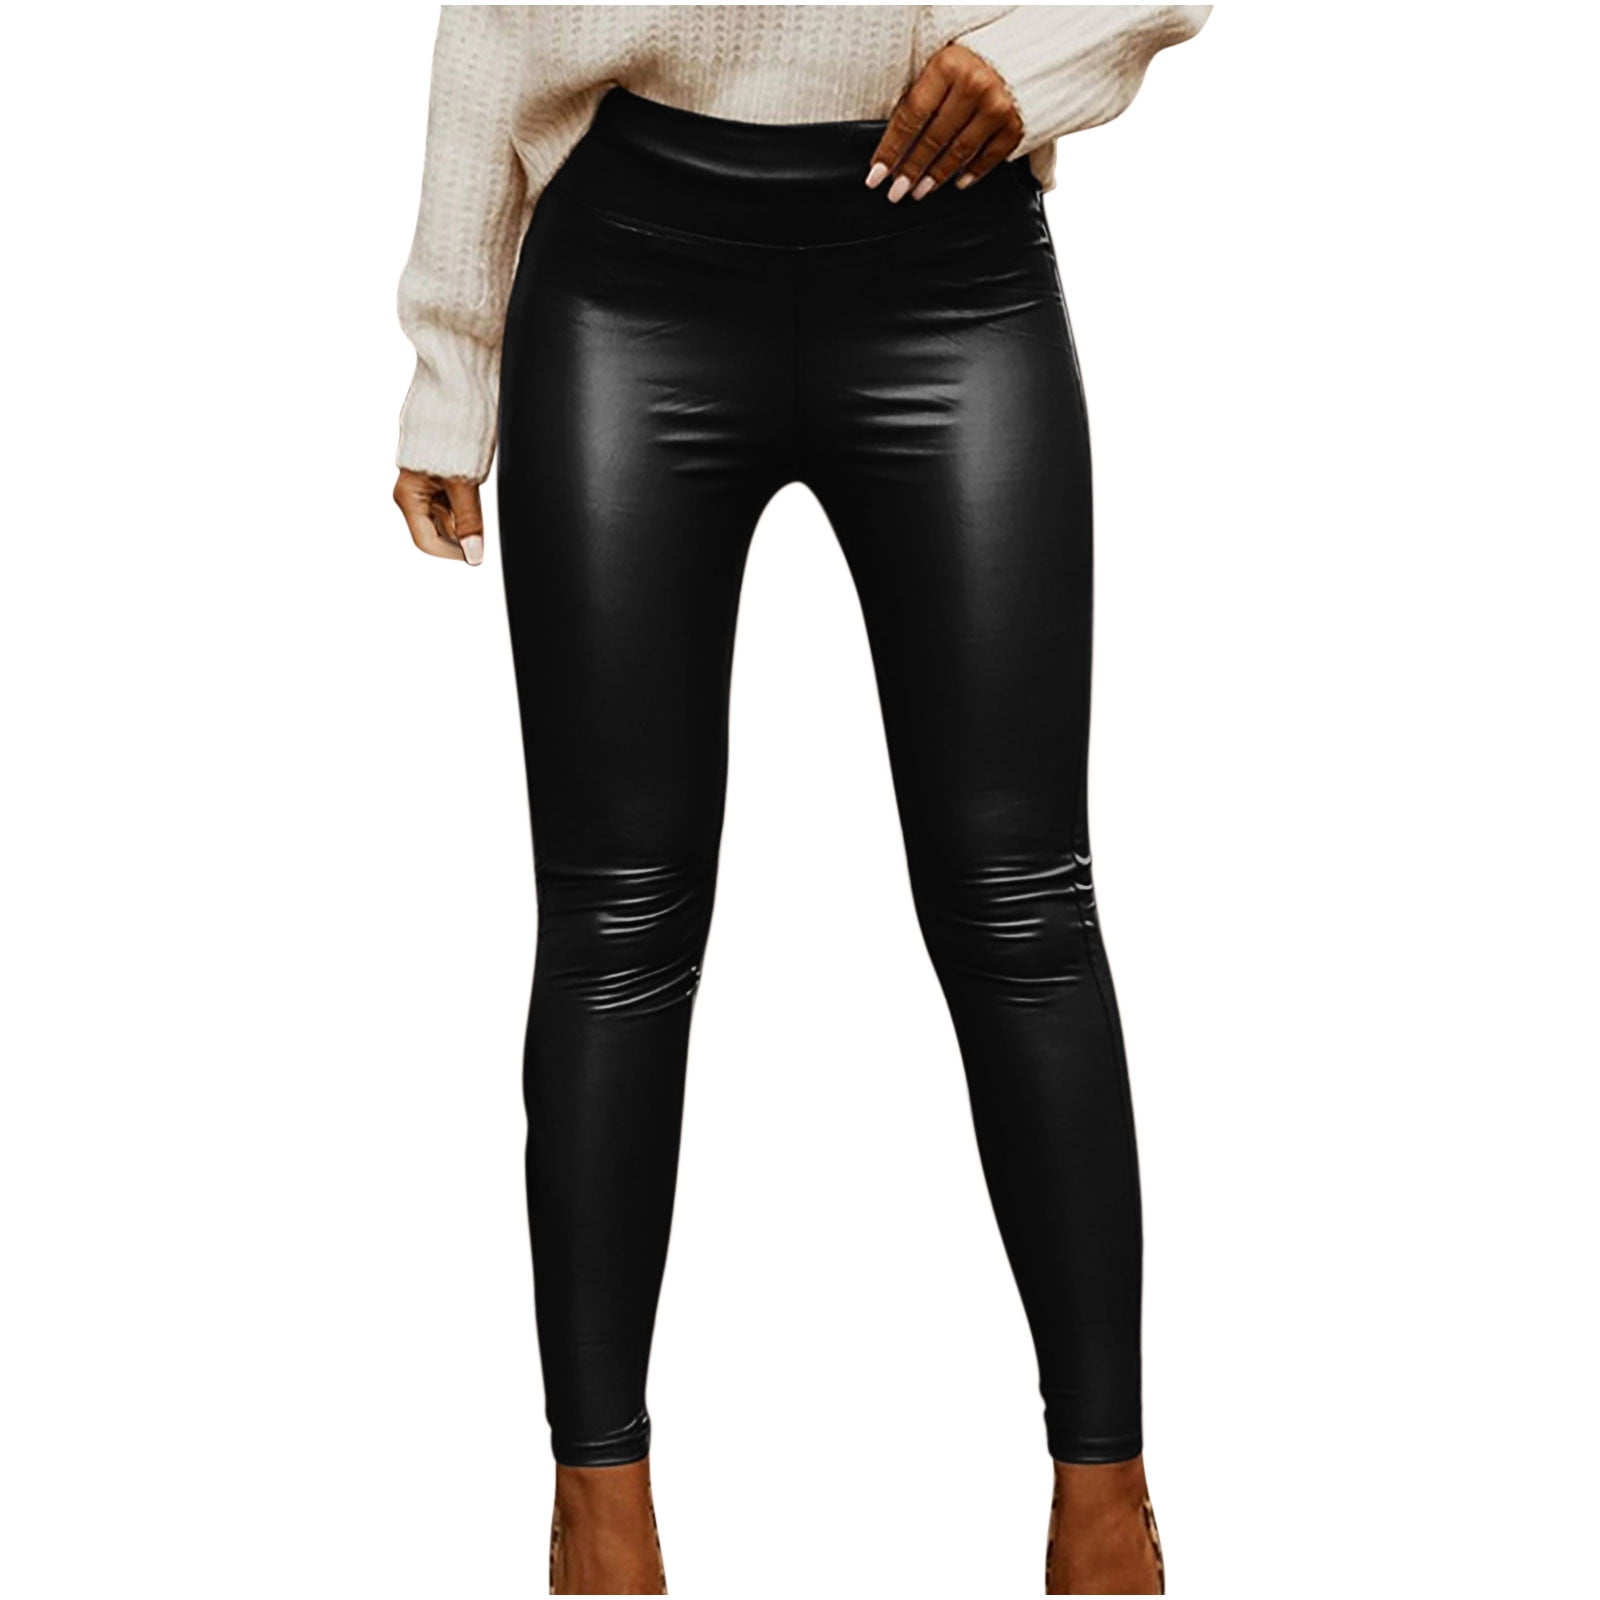 Pgeraug leather pants for women High Elasticity Zippers Leggings Gym Active  Leather pants for women Black XL 